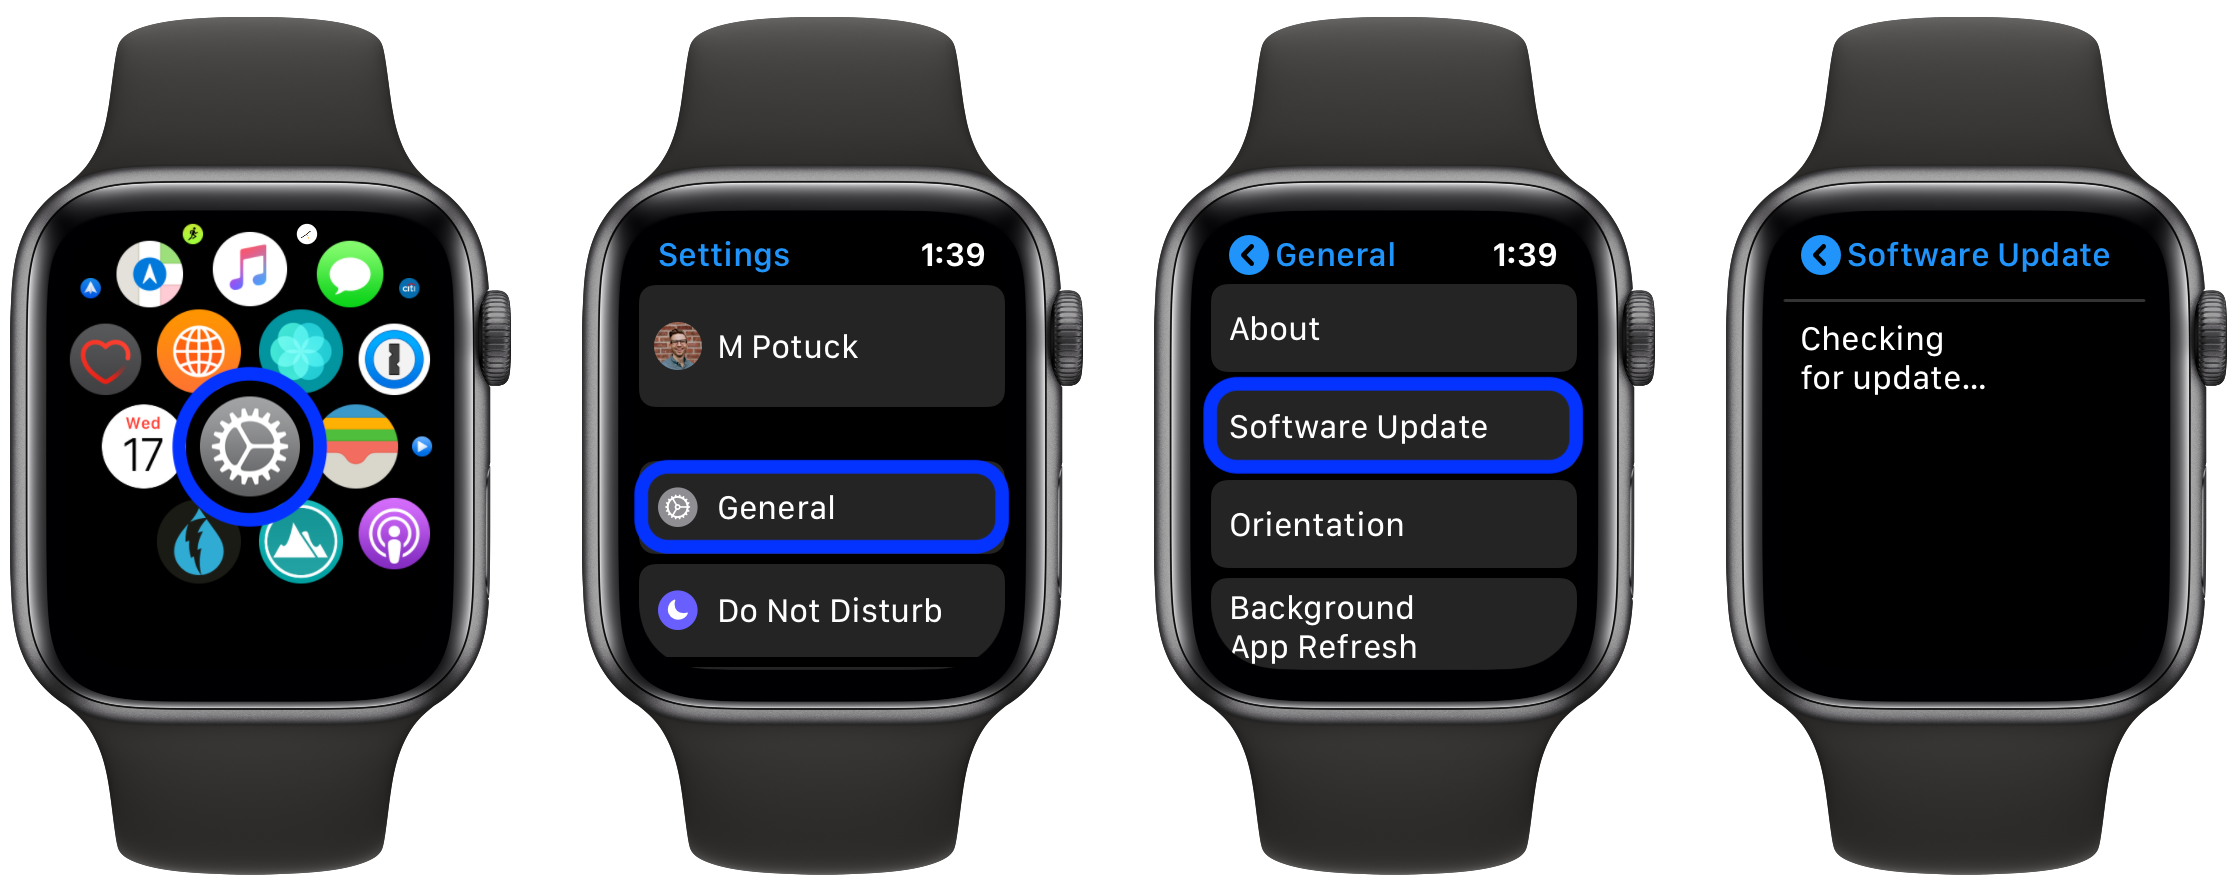 How to update software directly on Apple Watch